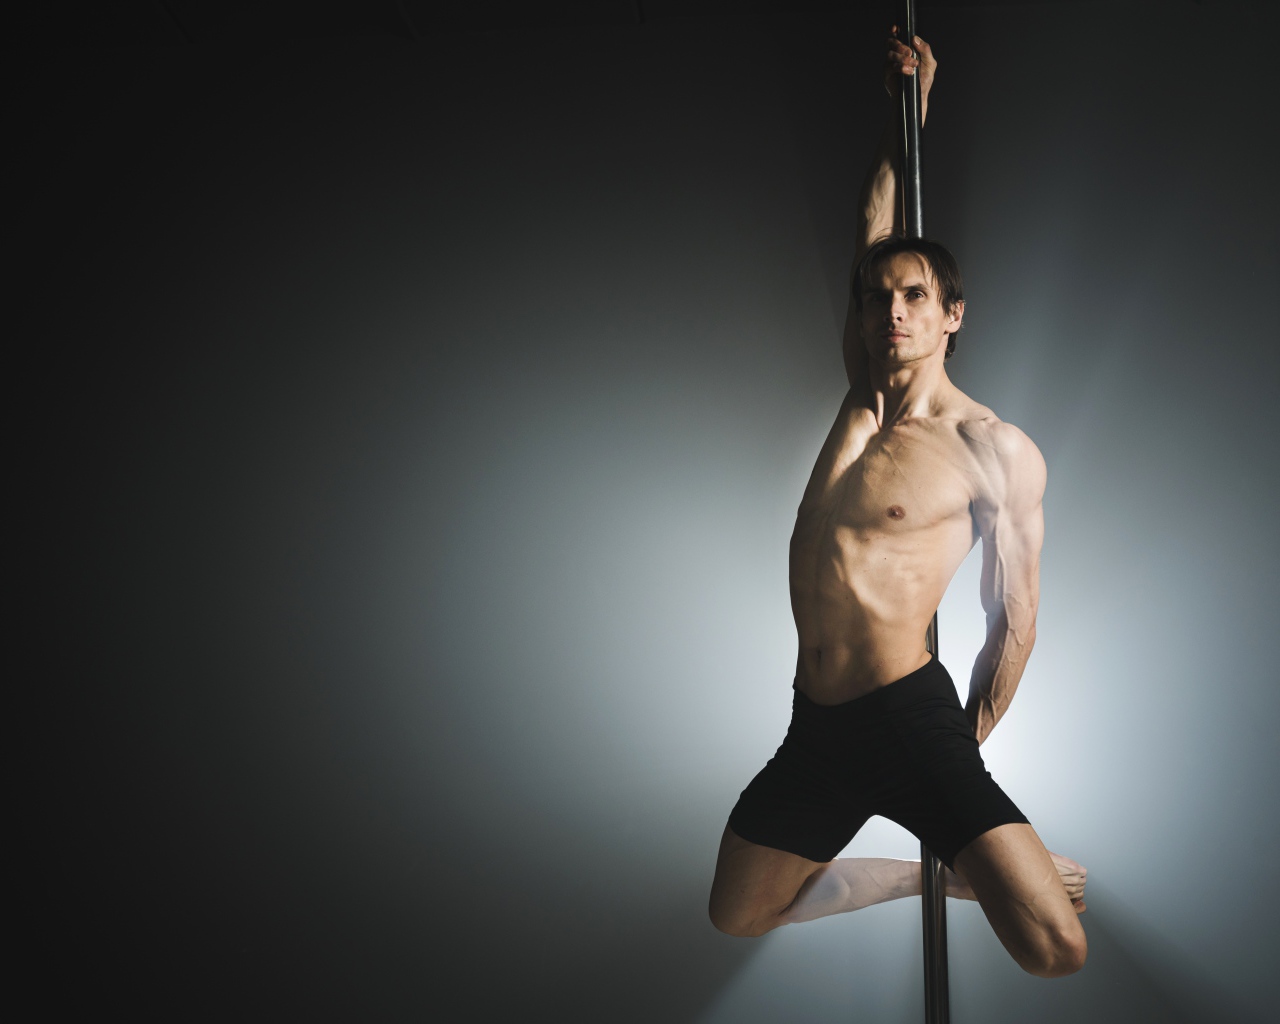 Man dancing on a pole on a gray background